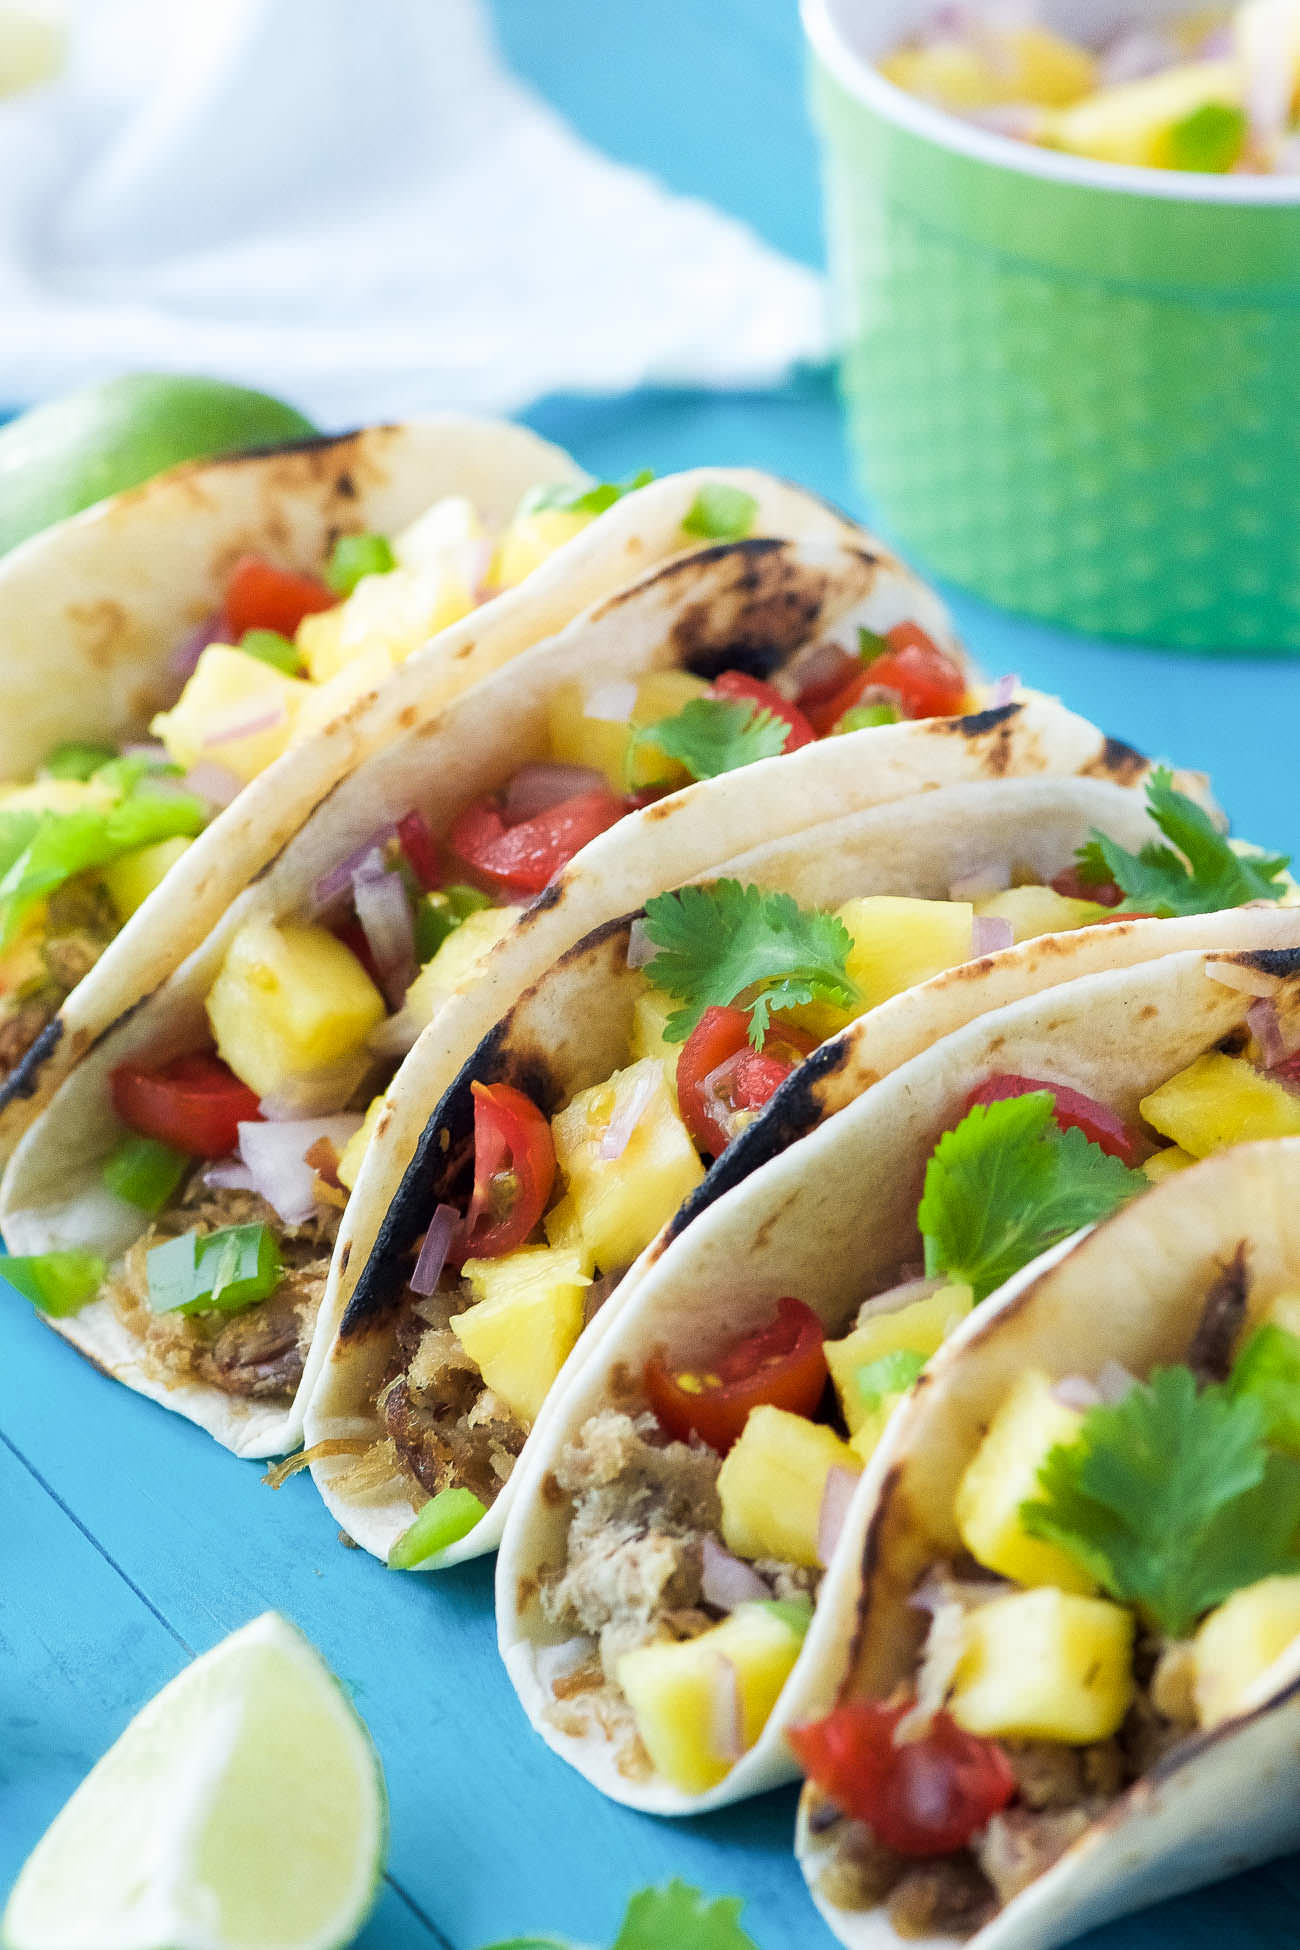 Hawaiian BBQ Pork Tacos are filled with crispy, spiced pork and topped with an irresistible and juicy Pineapple Pico de Gallo! The ideal summer street taco! 